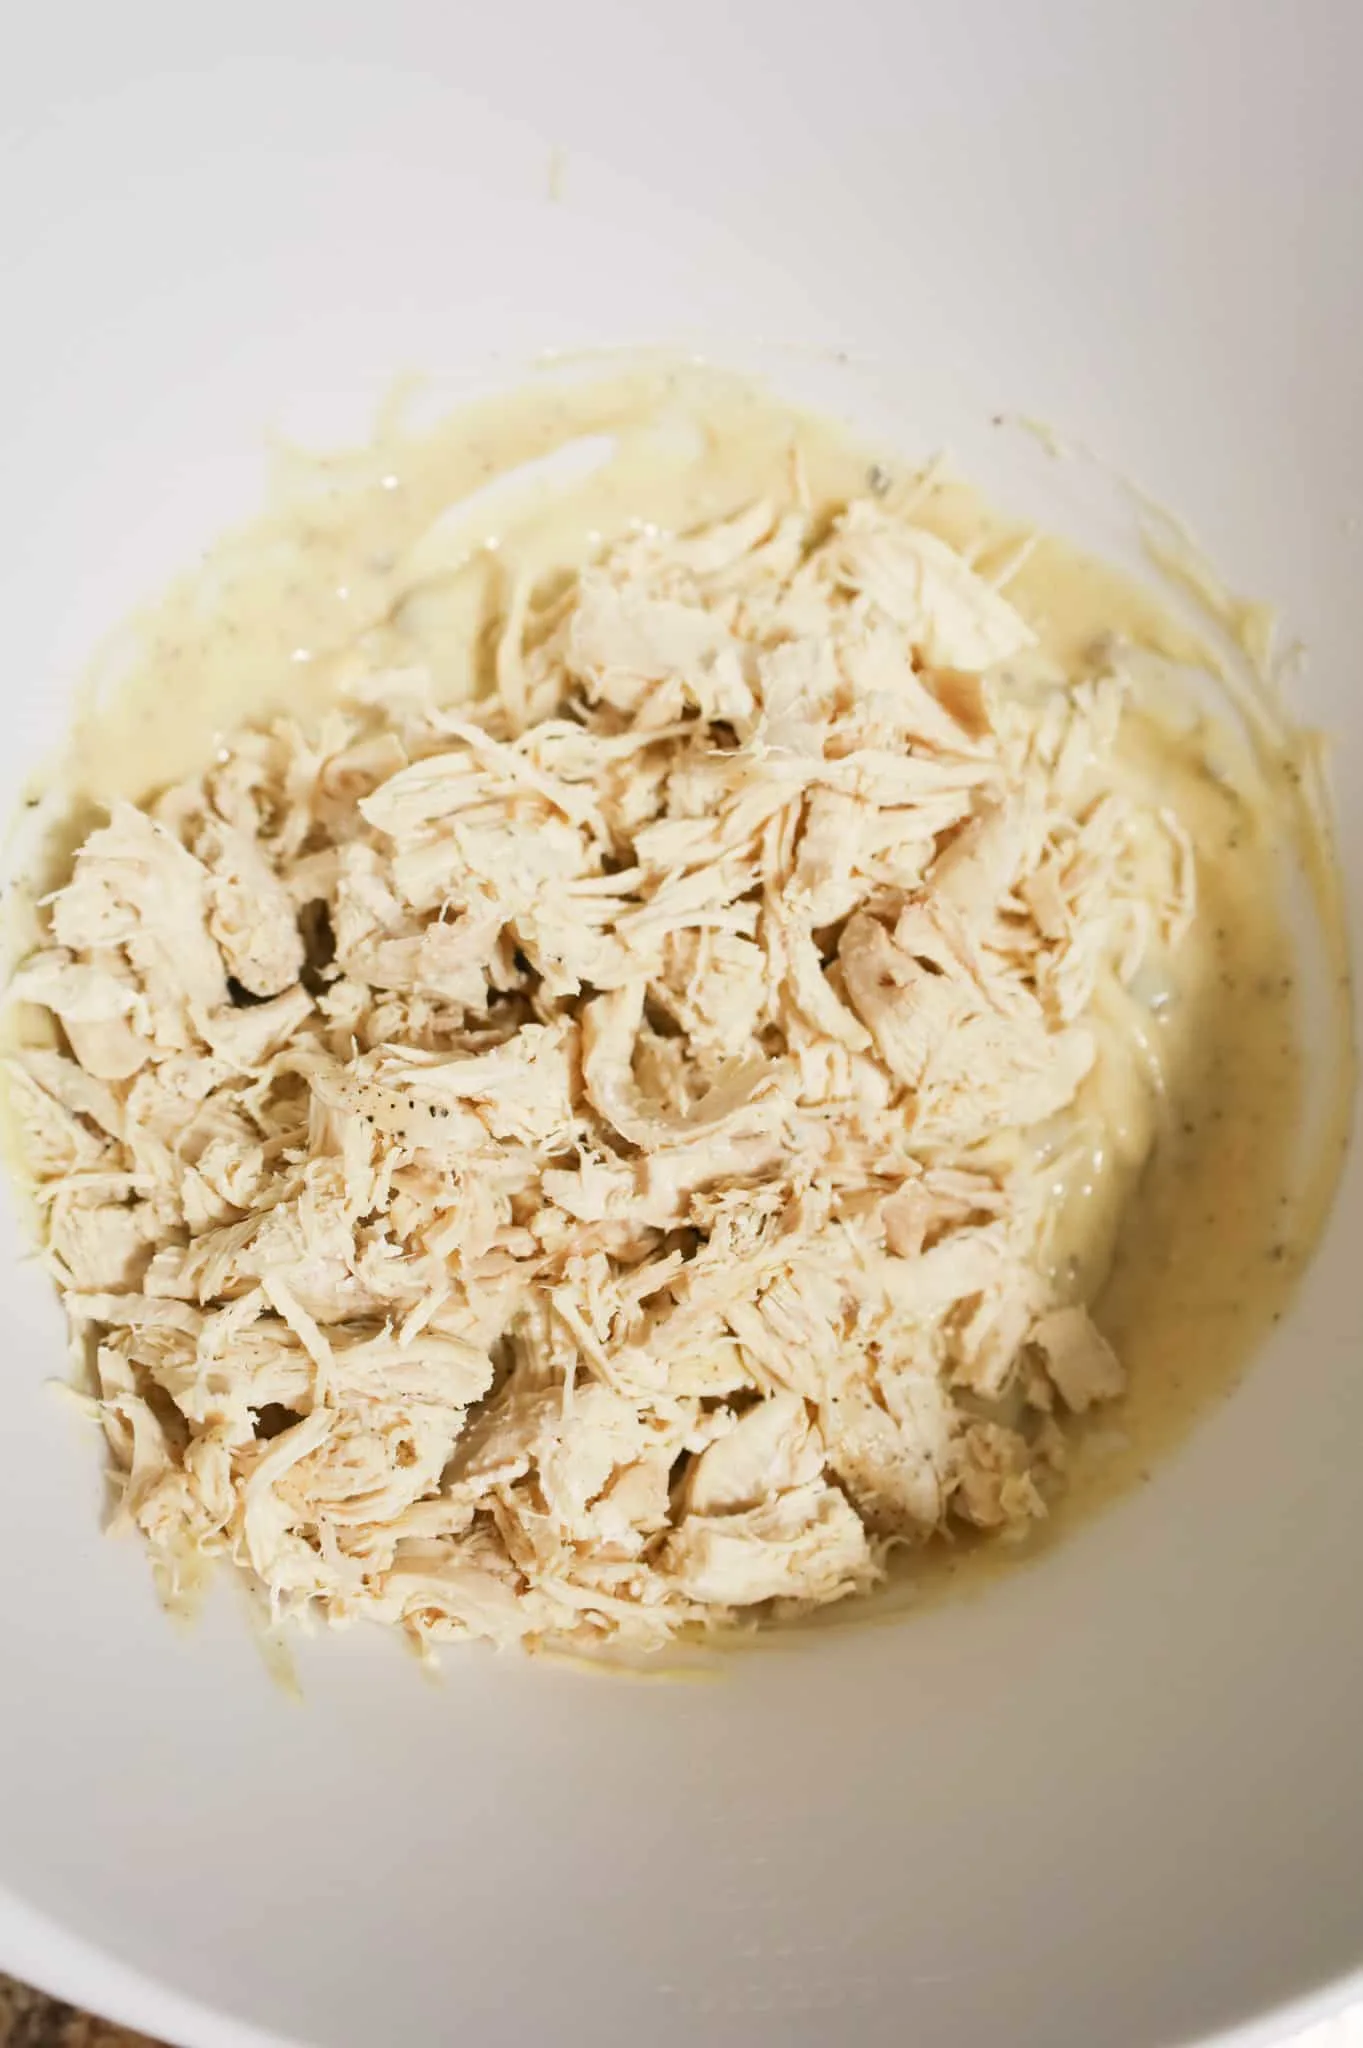 shredded chicken on top of cream soup mixture in a mixing bowl